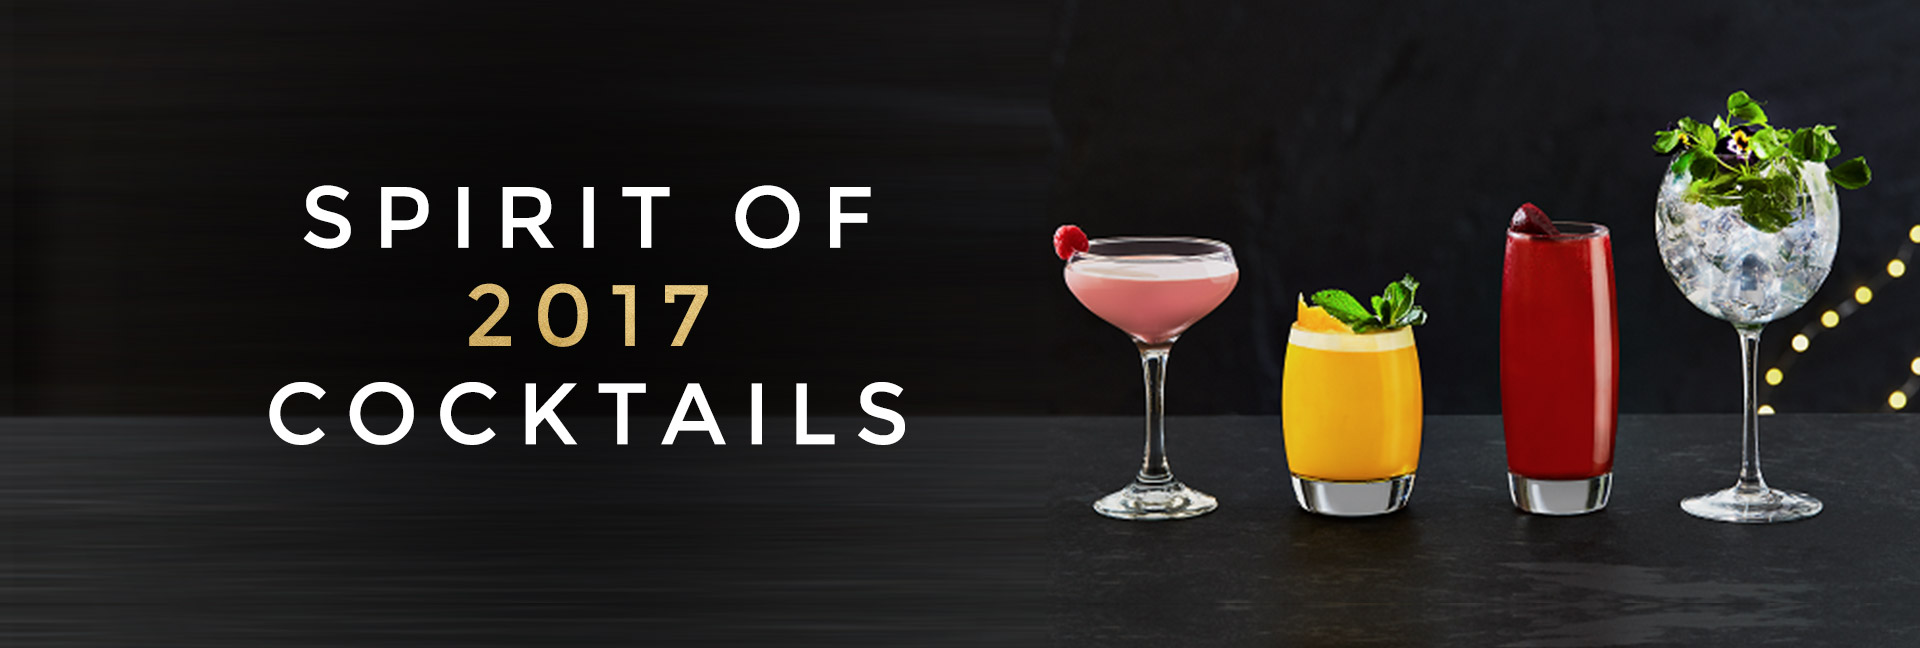 Spirit of 2017 cocktails at All Bar One Norwich